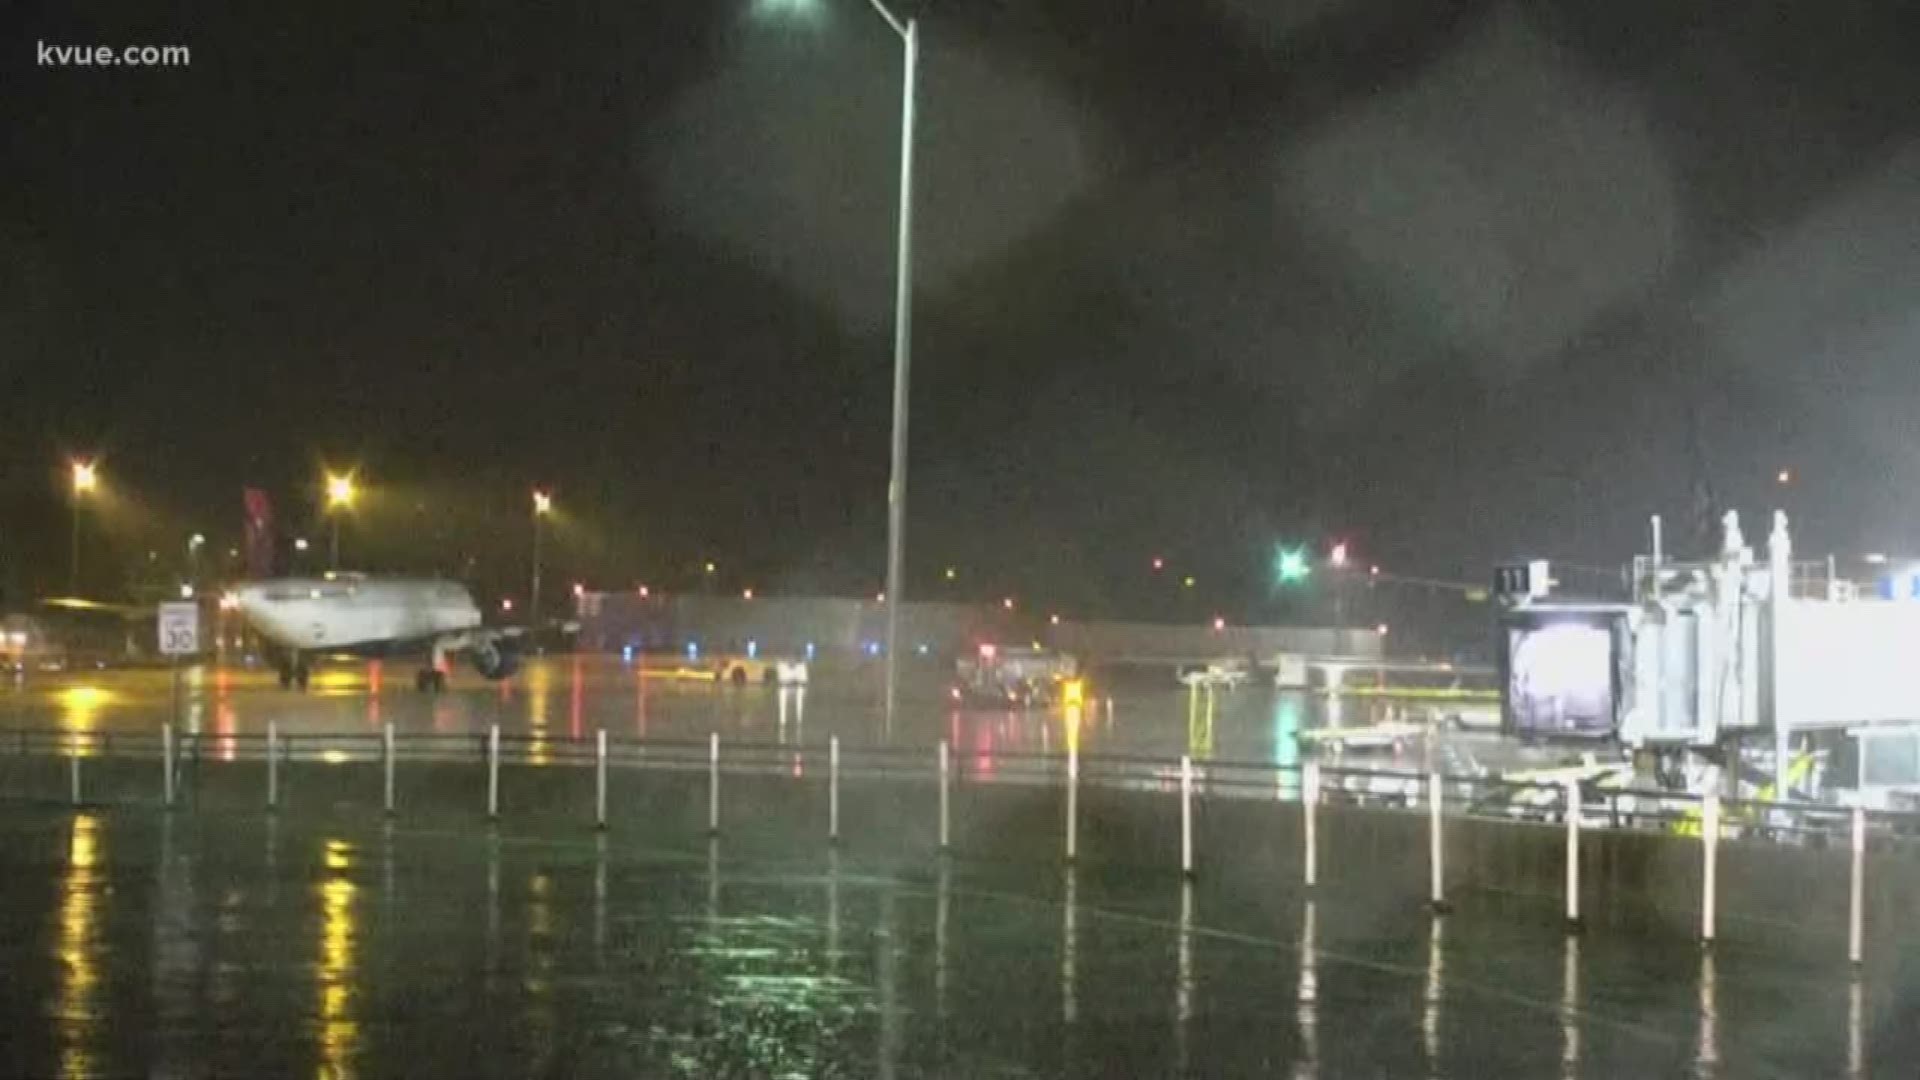 Many travelers were diverted to Austin due to bad weather in Houston, only to get stuck when severe weather hit Central Texas.